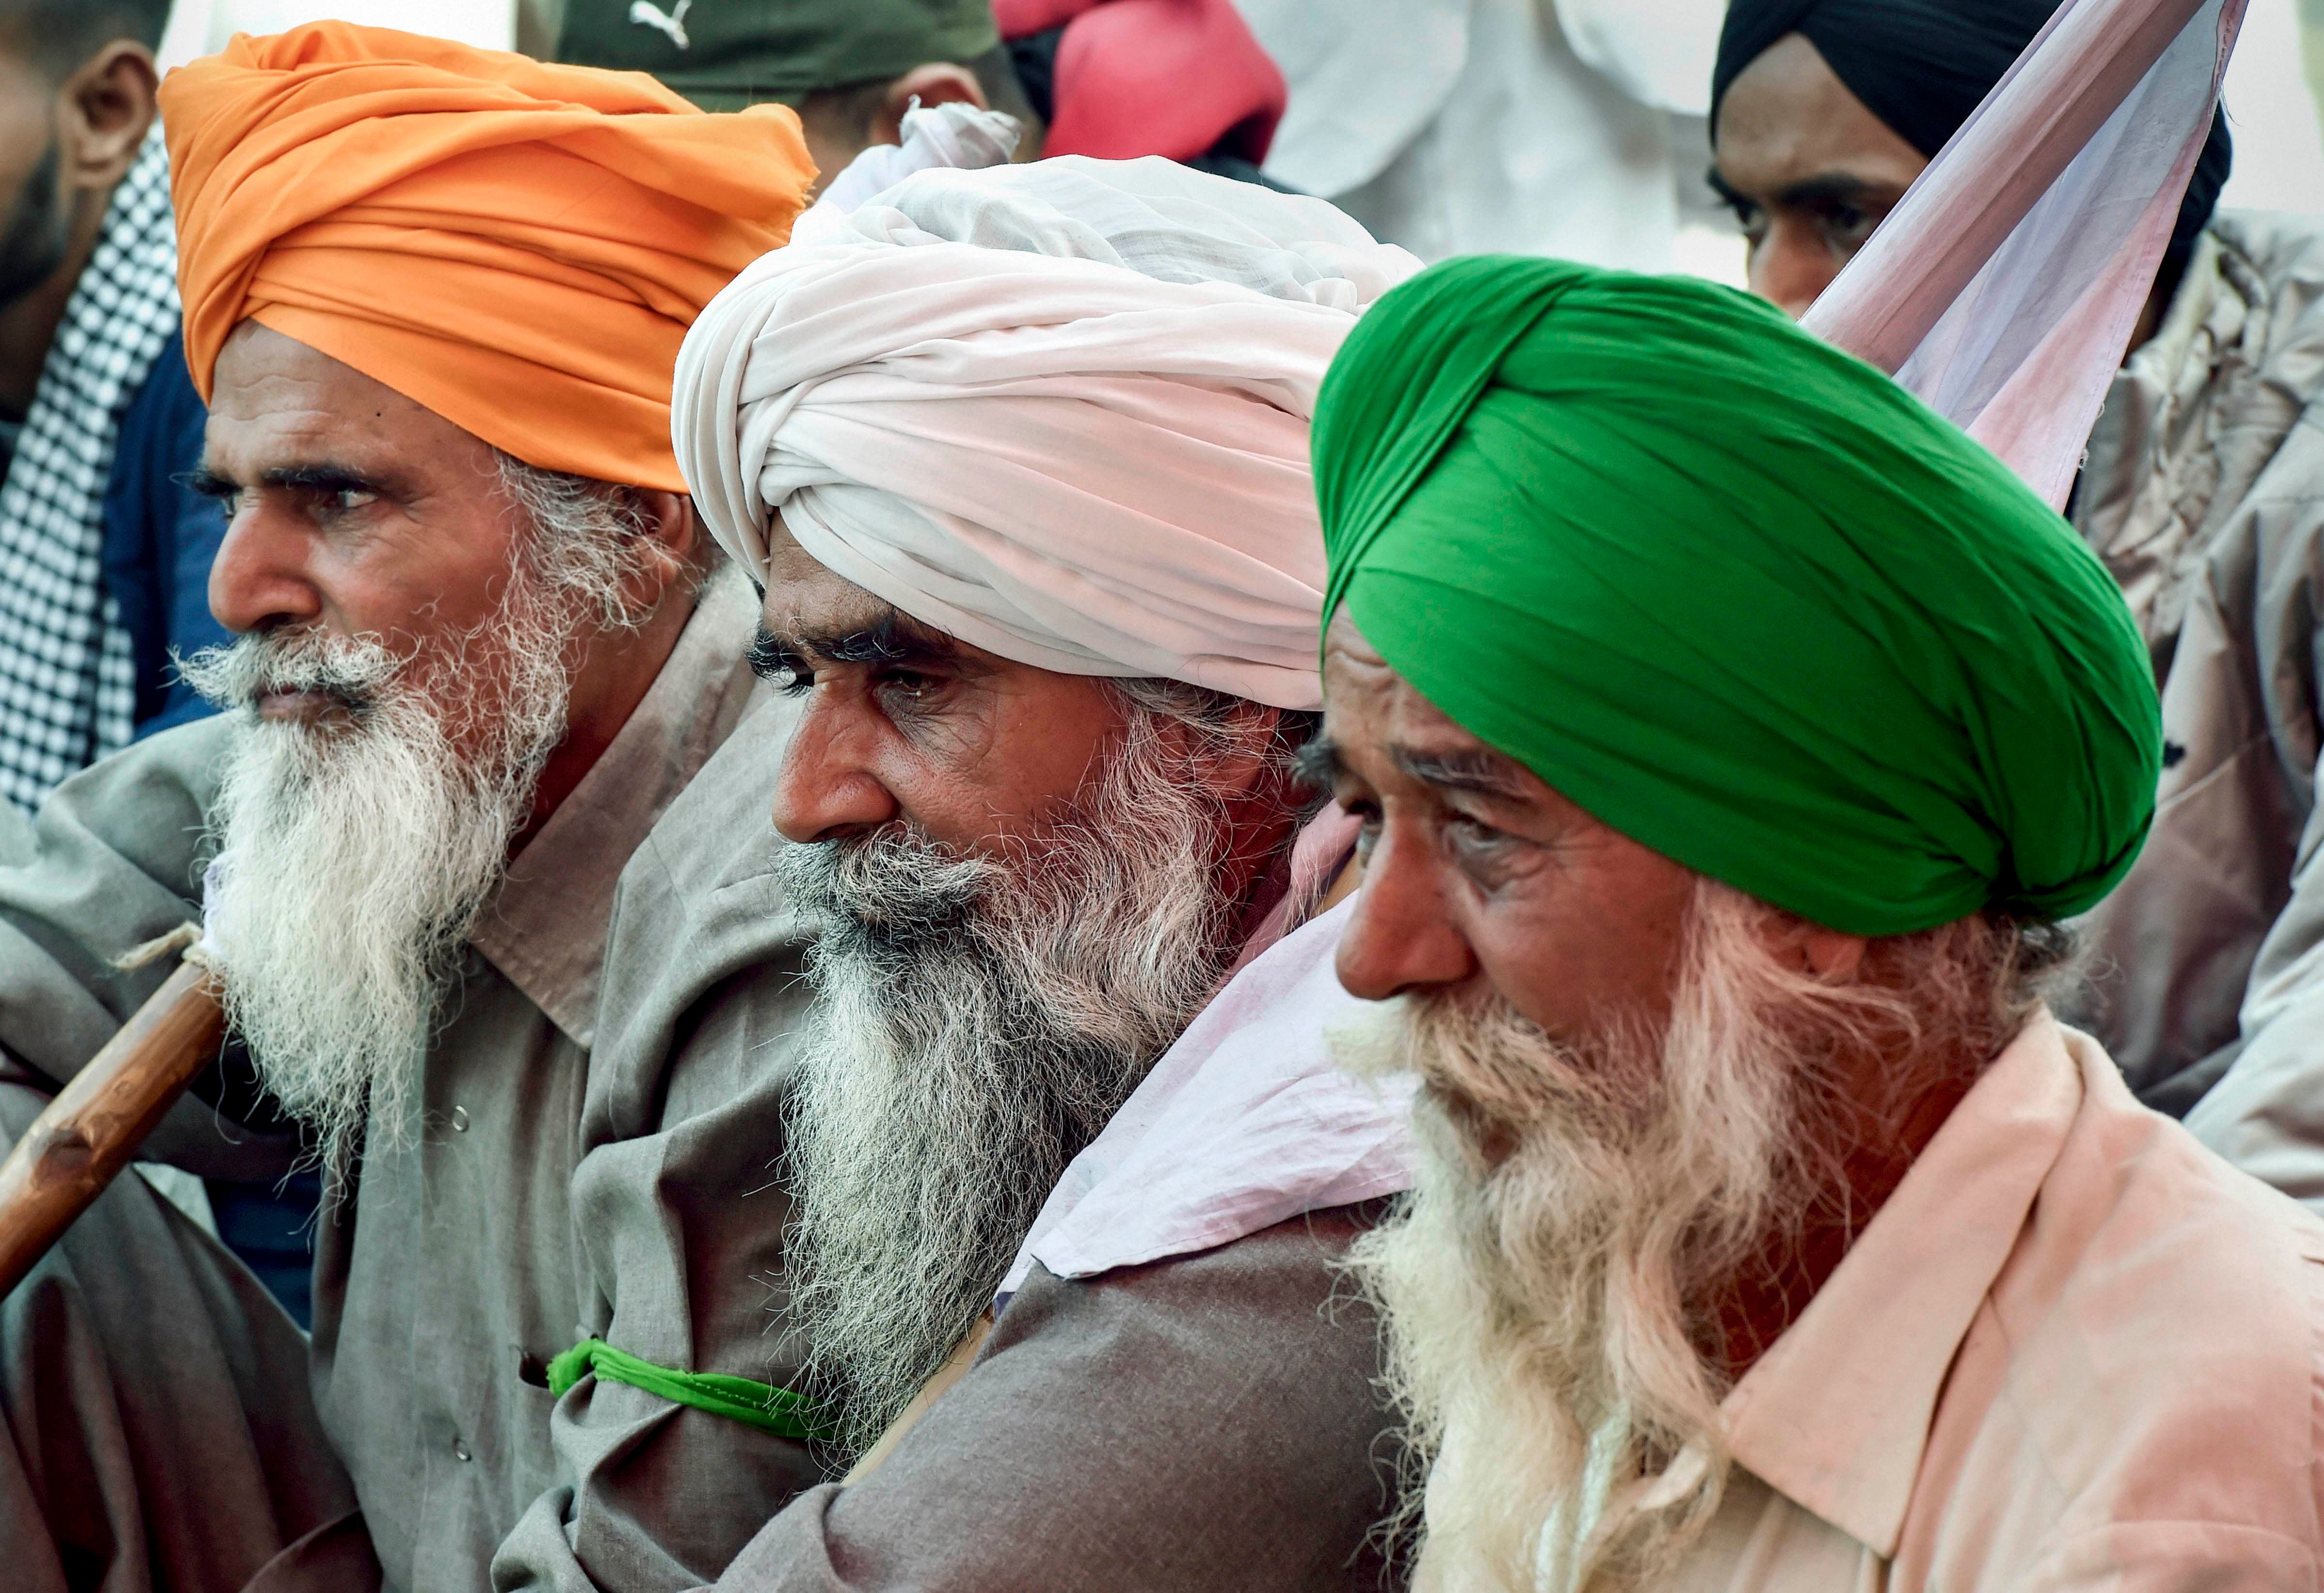 Farmers during their 'Delhi Chalo' protest march against the new farm laws, at Singhu border in New Delhi, Sunday, Dec. 6, 2020. Credit: PTI Photo